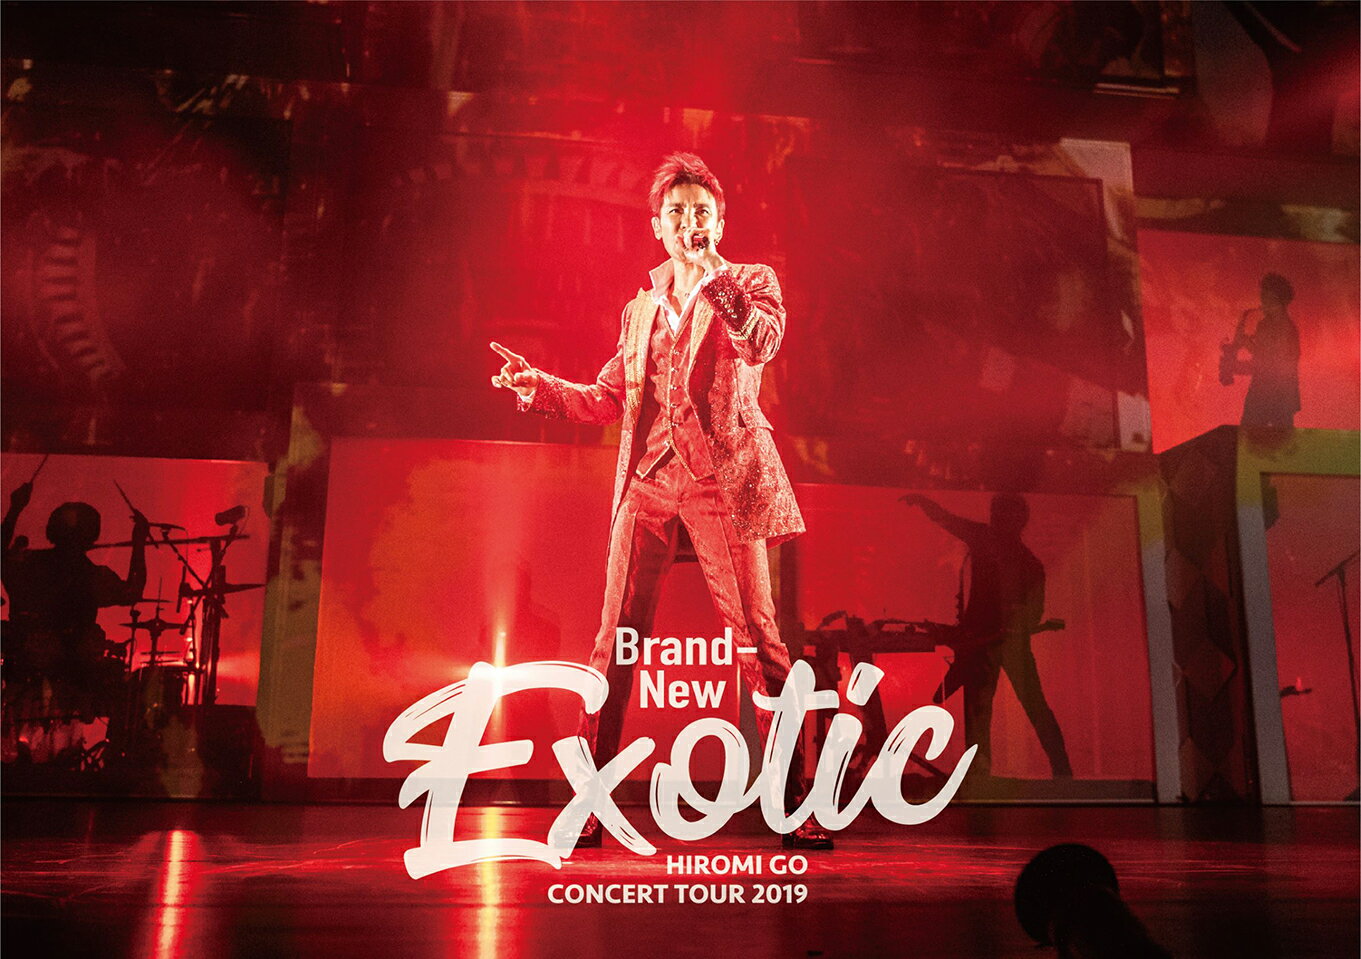 Hiromi Go Concert Tour 2019 “Brand-New Exotic” [ 郷ひろみ ]